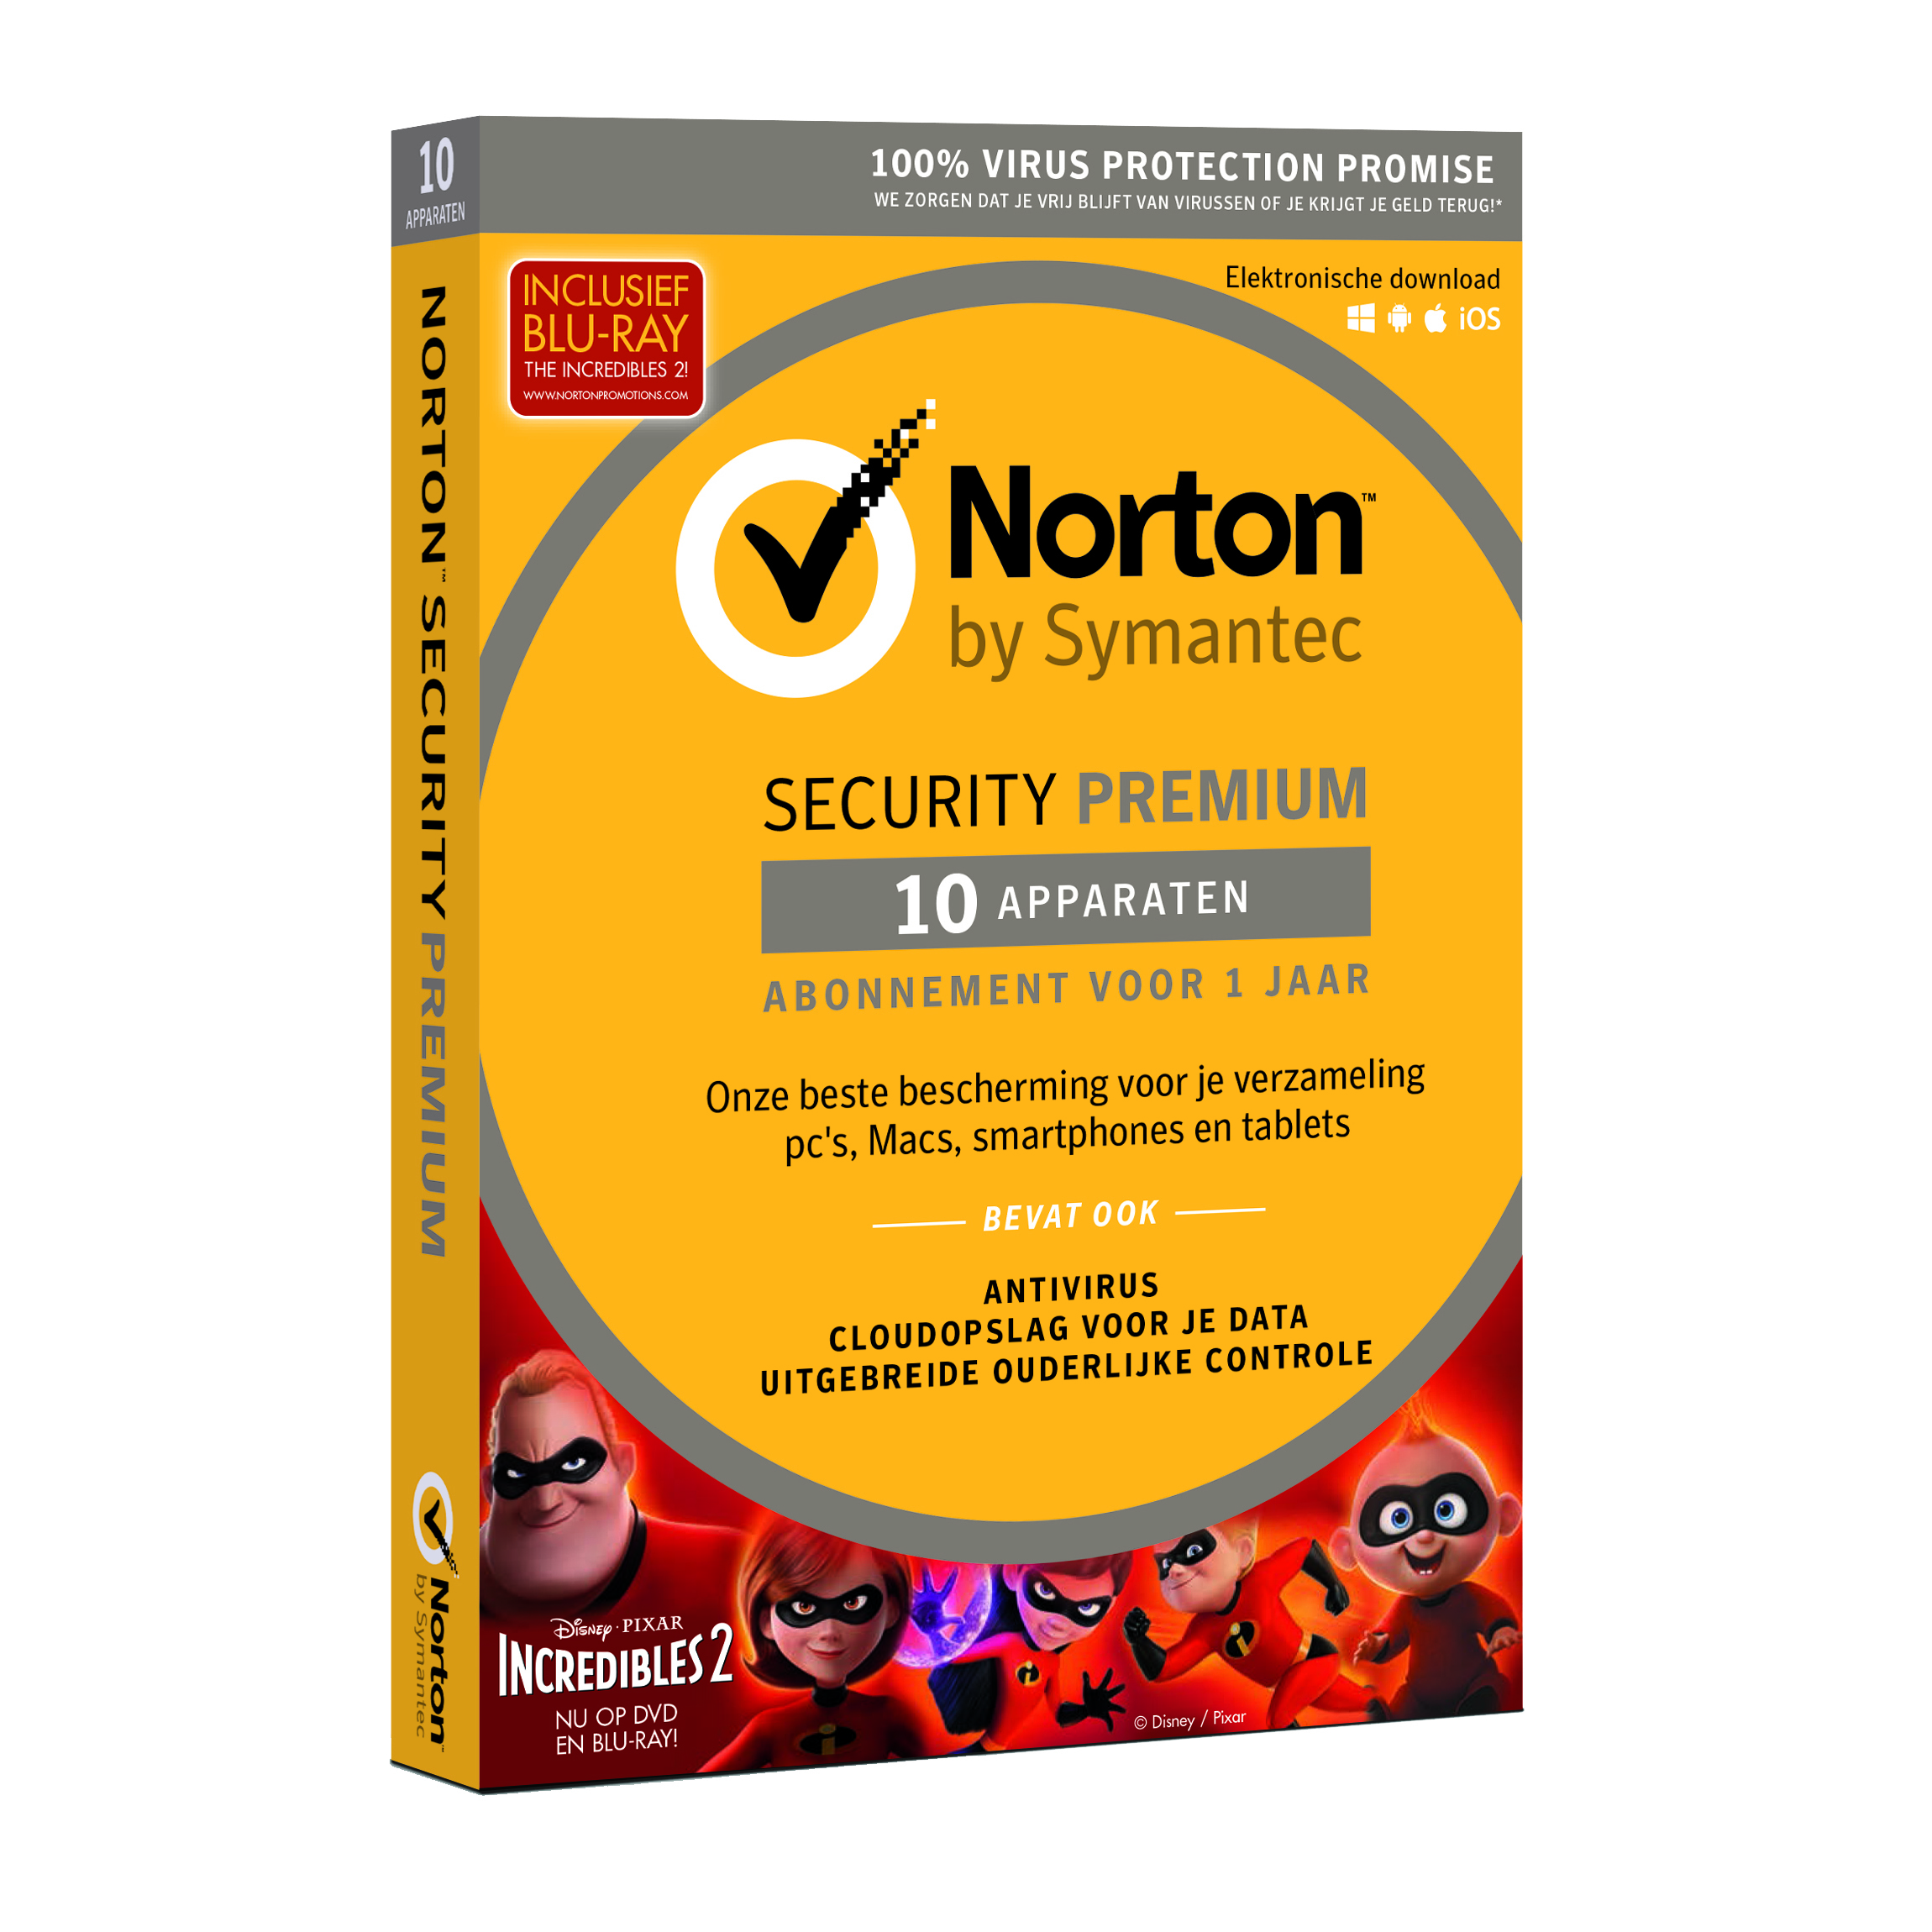 Norton Security Premium.10 Devices for 1 Year. All Security updates included.